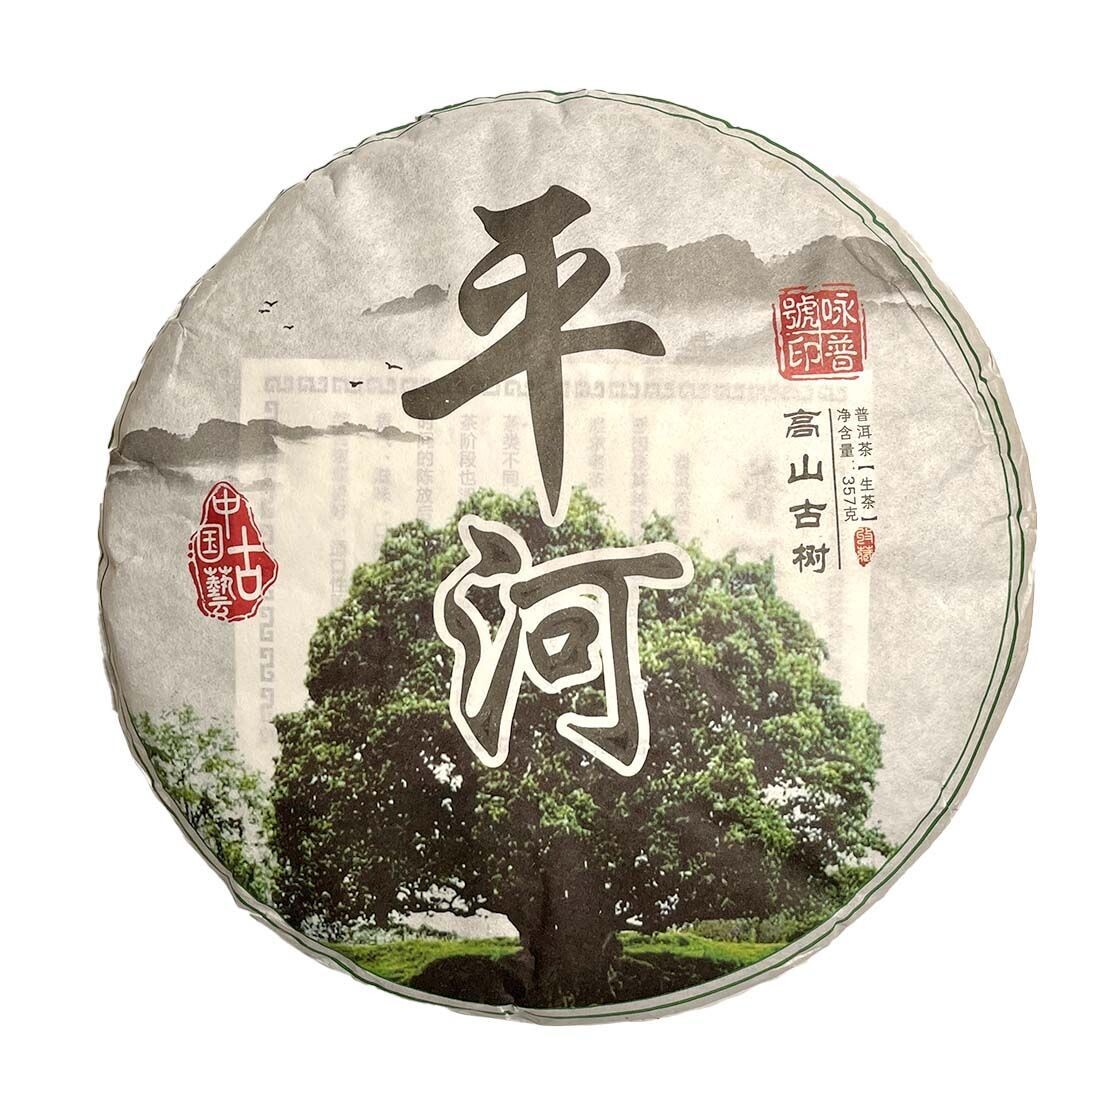 2019 PingHe Old Tree Raw Puerh, Size: Cake (357 grams)